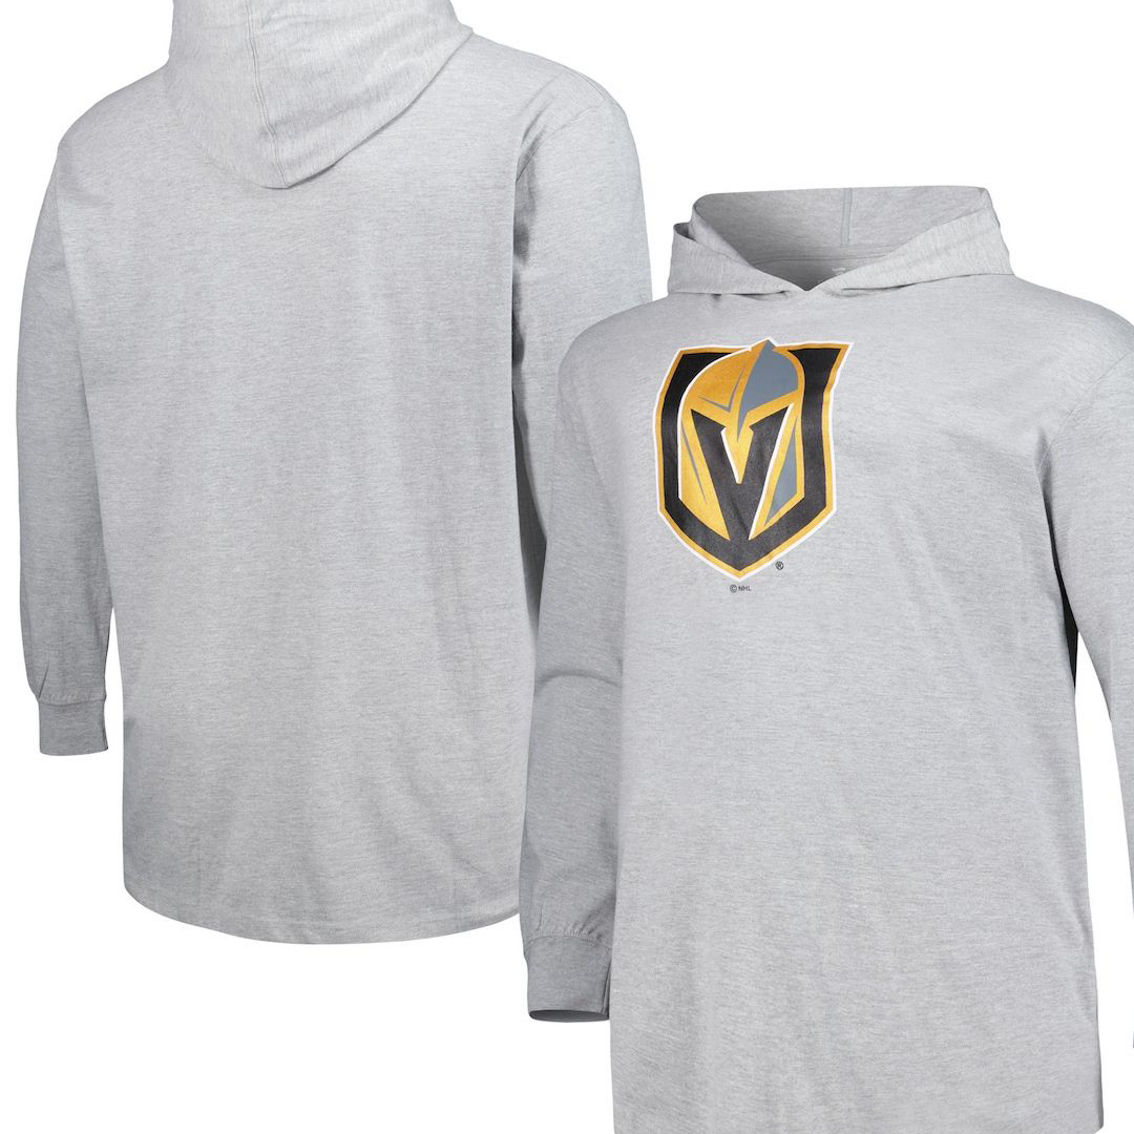 Profile Men's Heather Gray Vegas Golden Knights Big & Tall Pullover Hoodie - Image 1 of 4